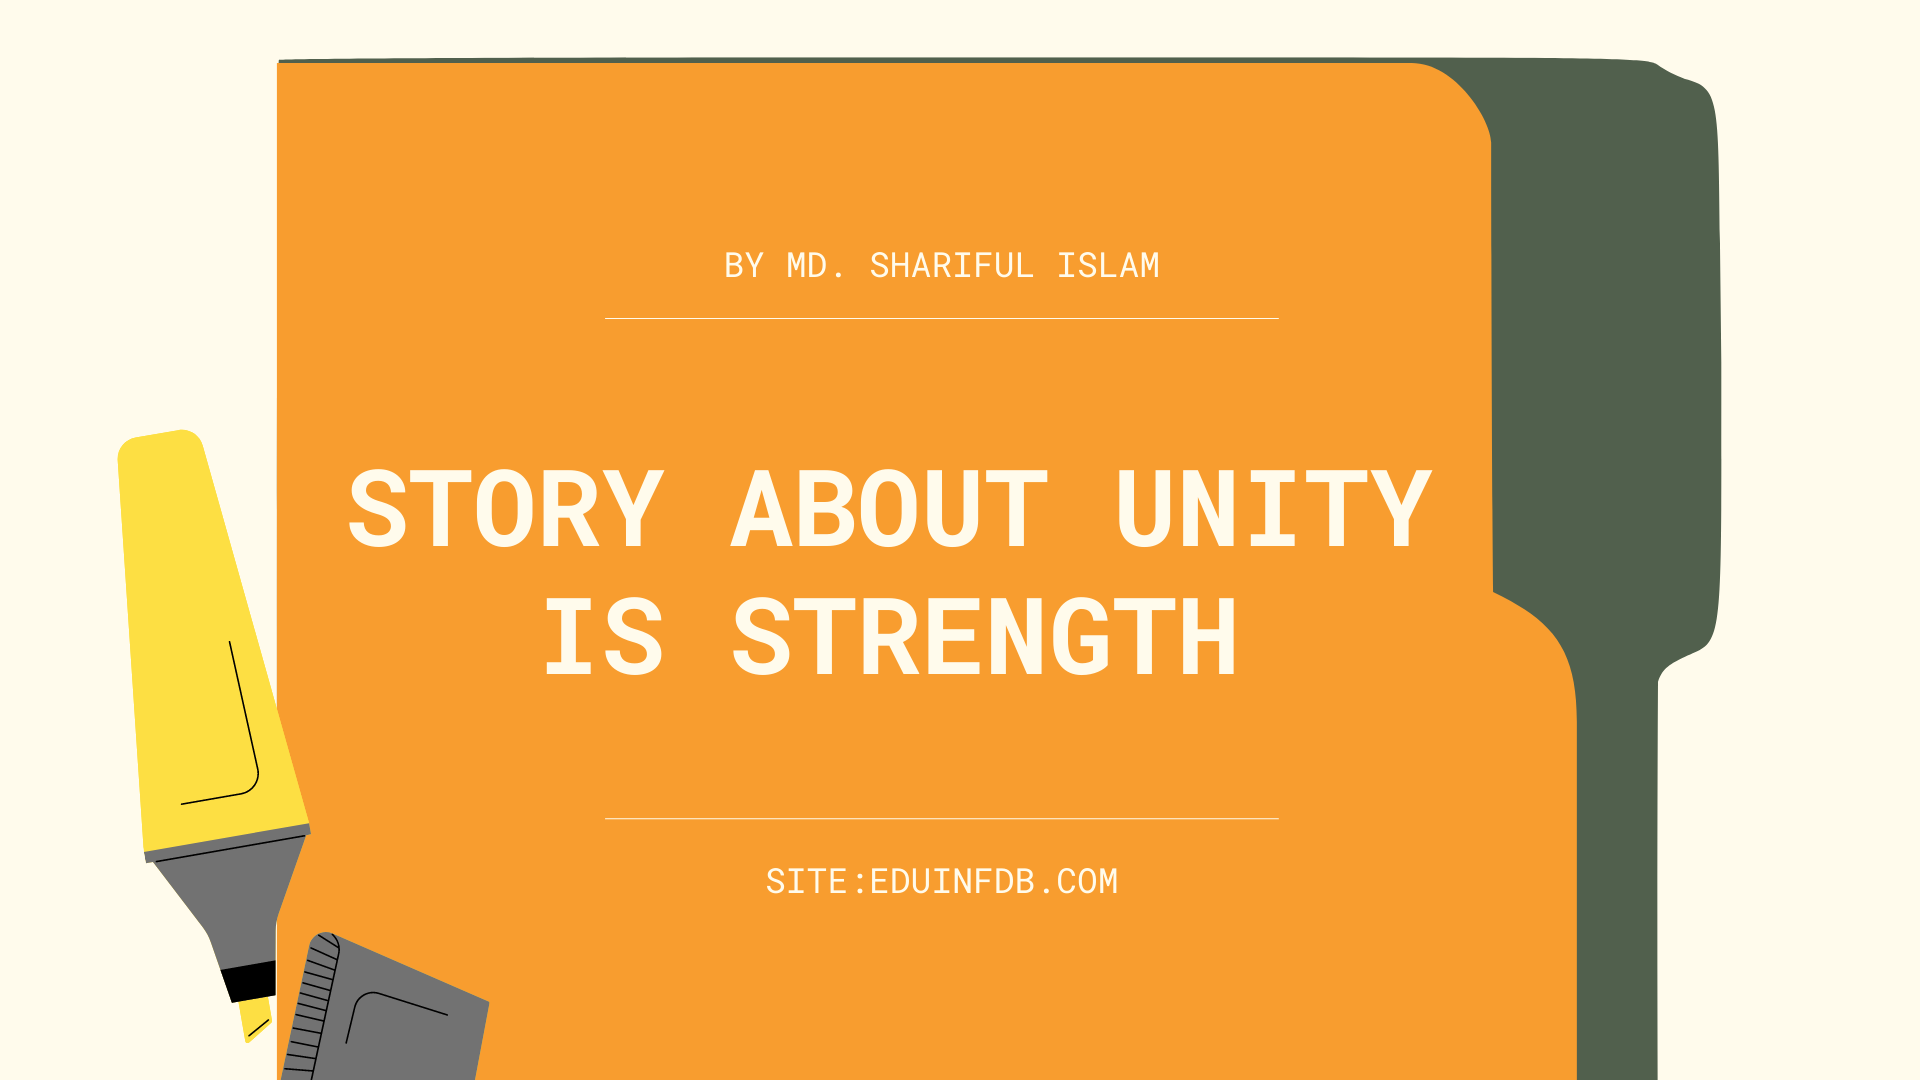 Story About Unity is Strength